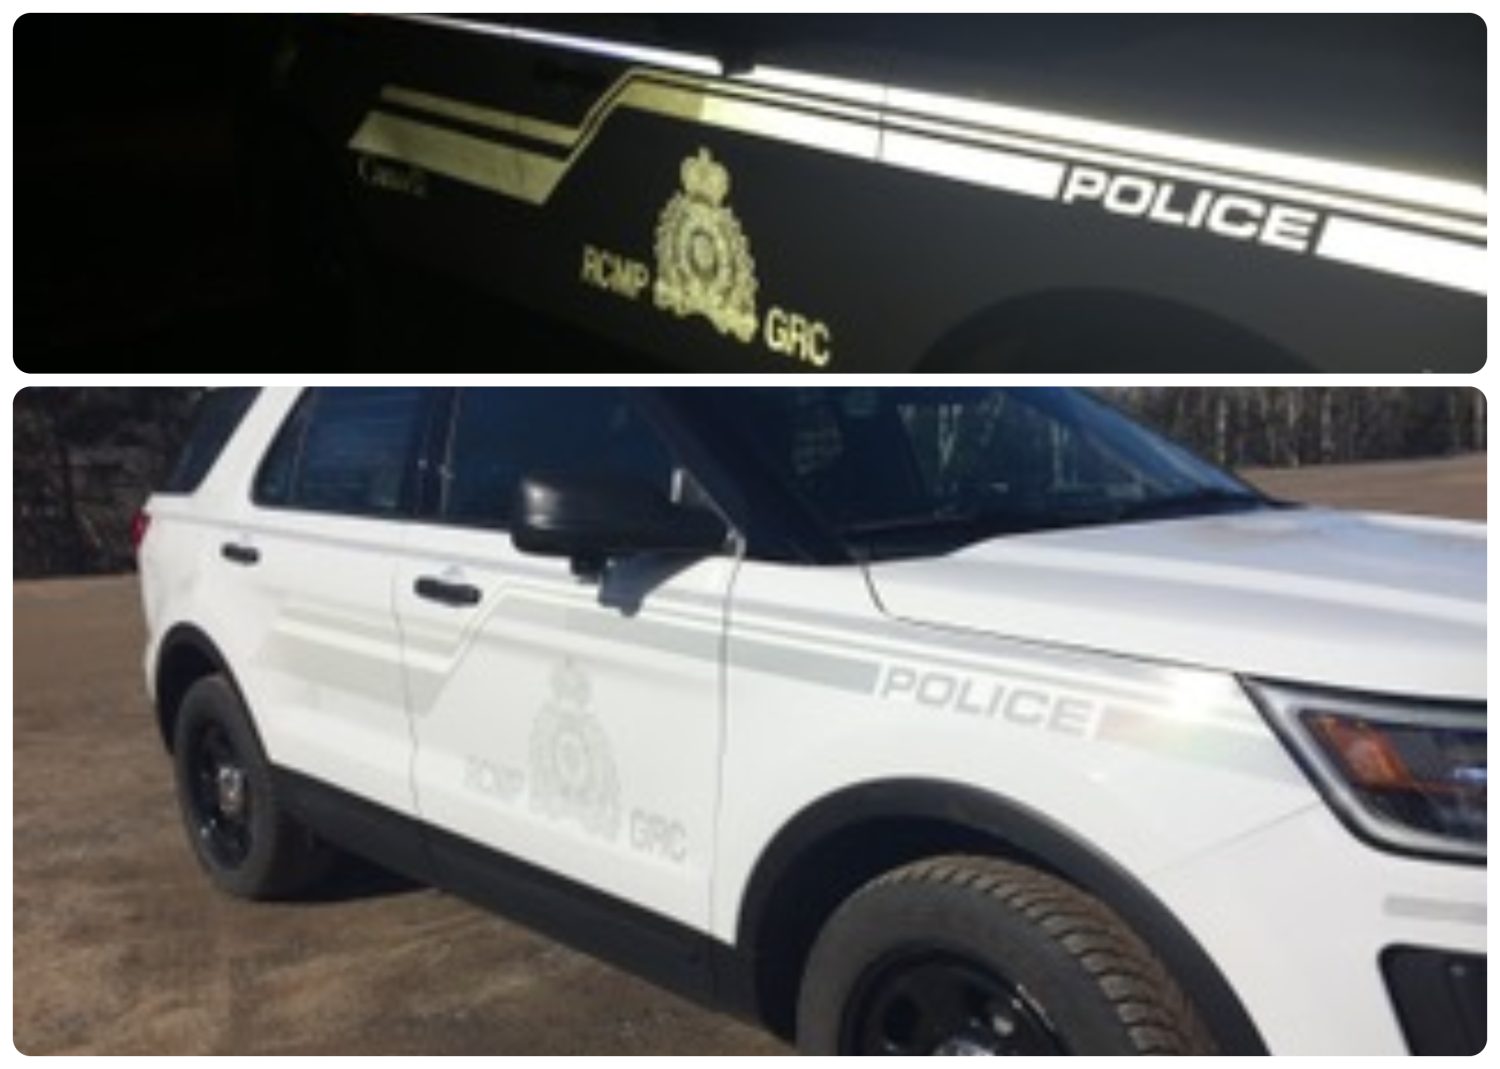 Police-package vehicles listed for sale, despite prohibition on sale of  decommissioned RCMP cars